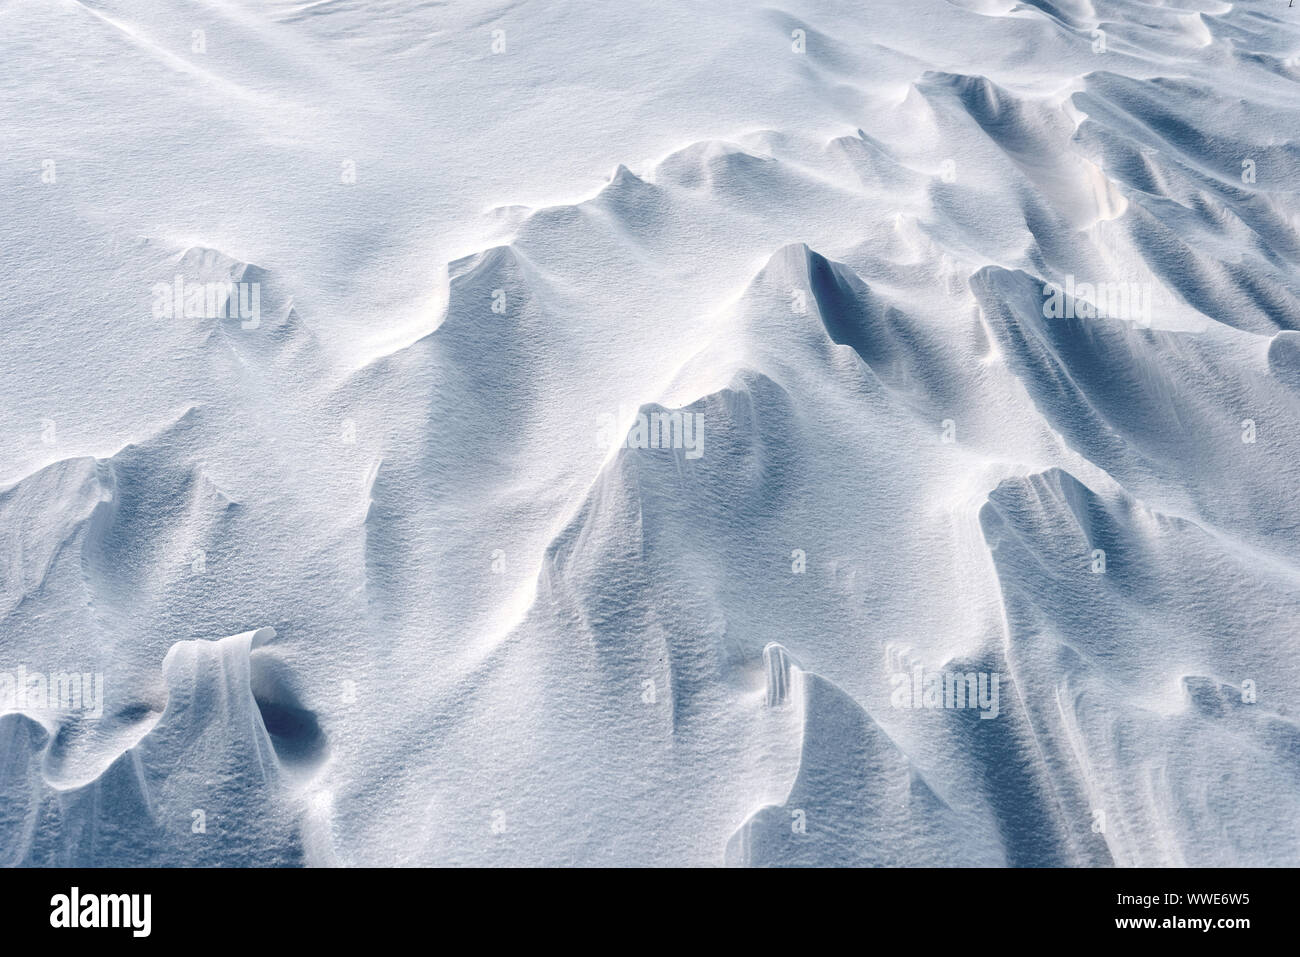 Winter snow blizzard patterns from a frozen season tundra with nobody in the image Stock Photo